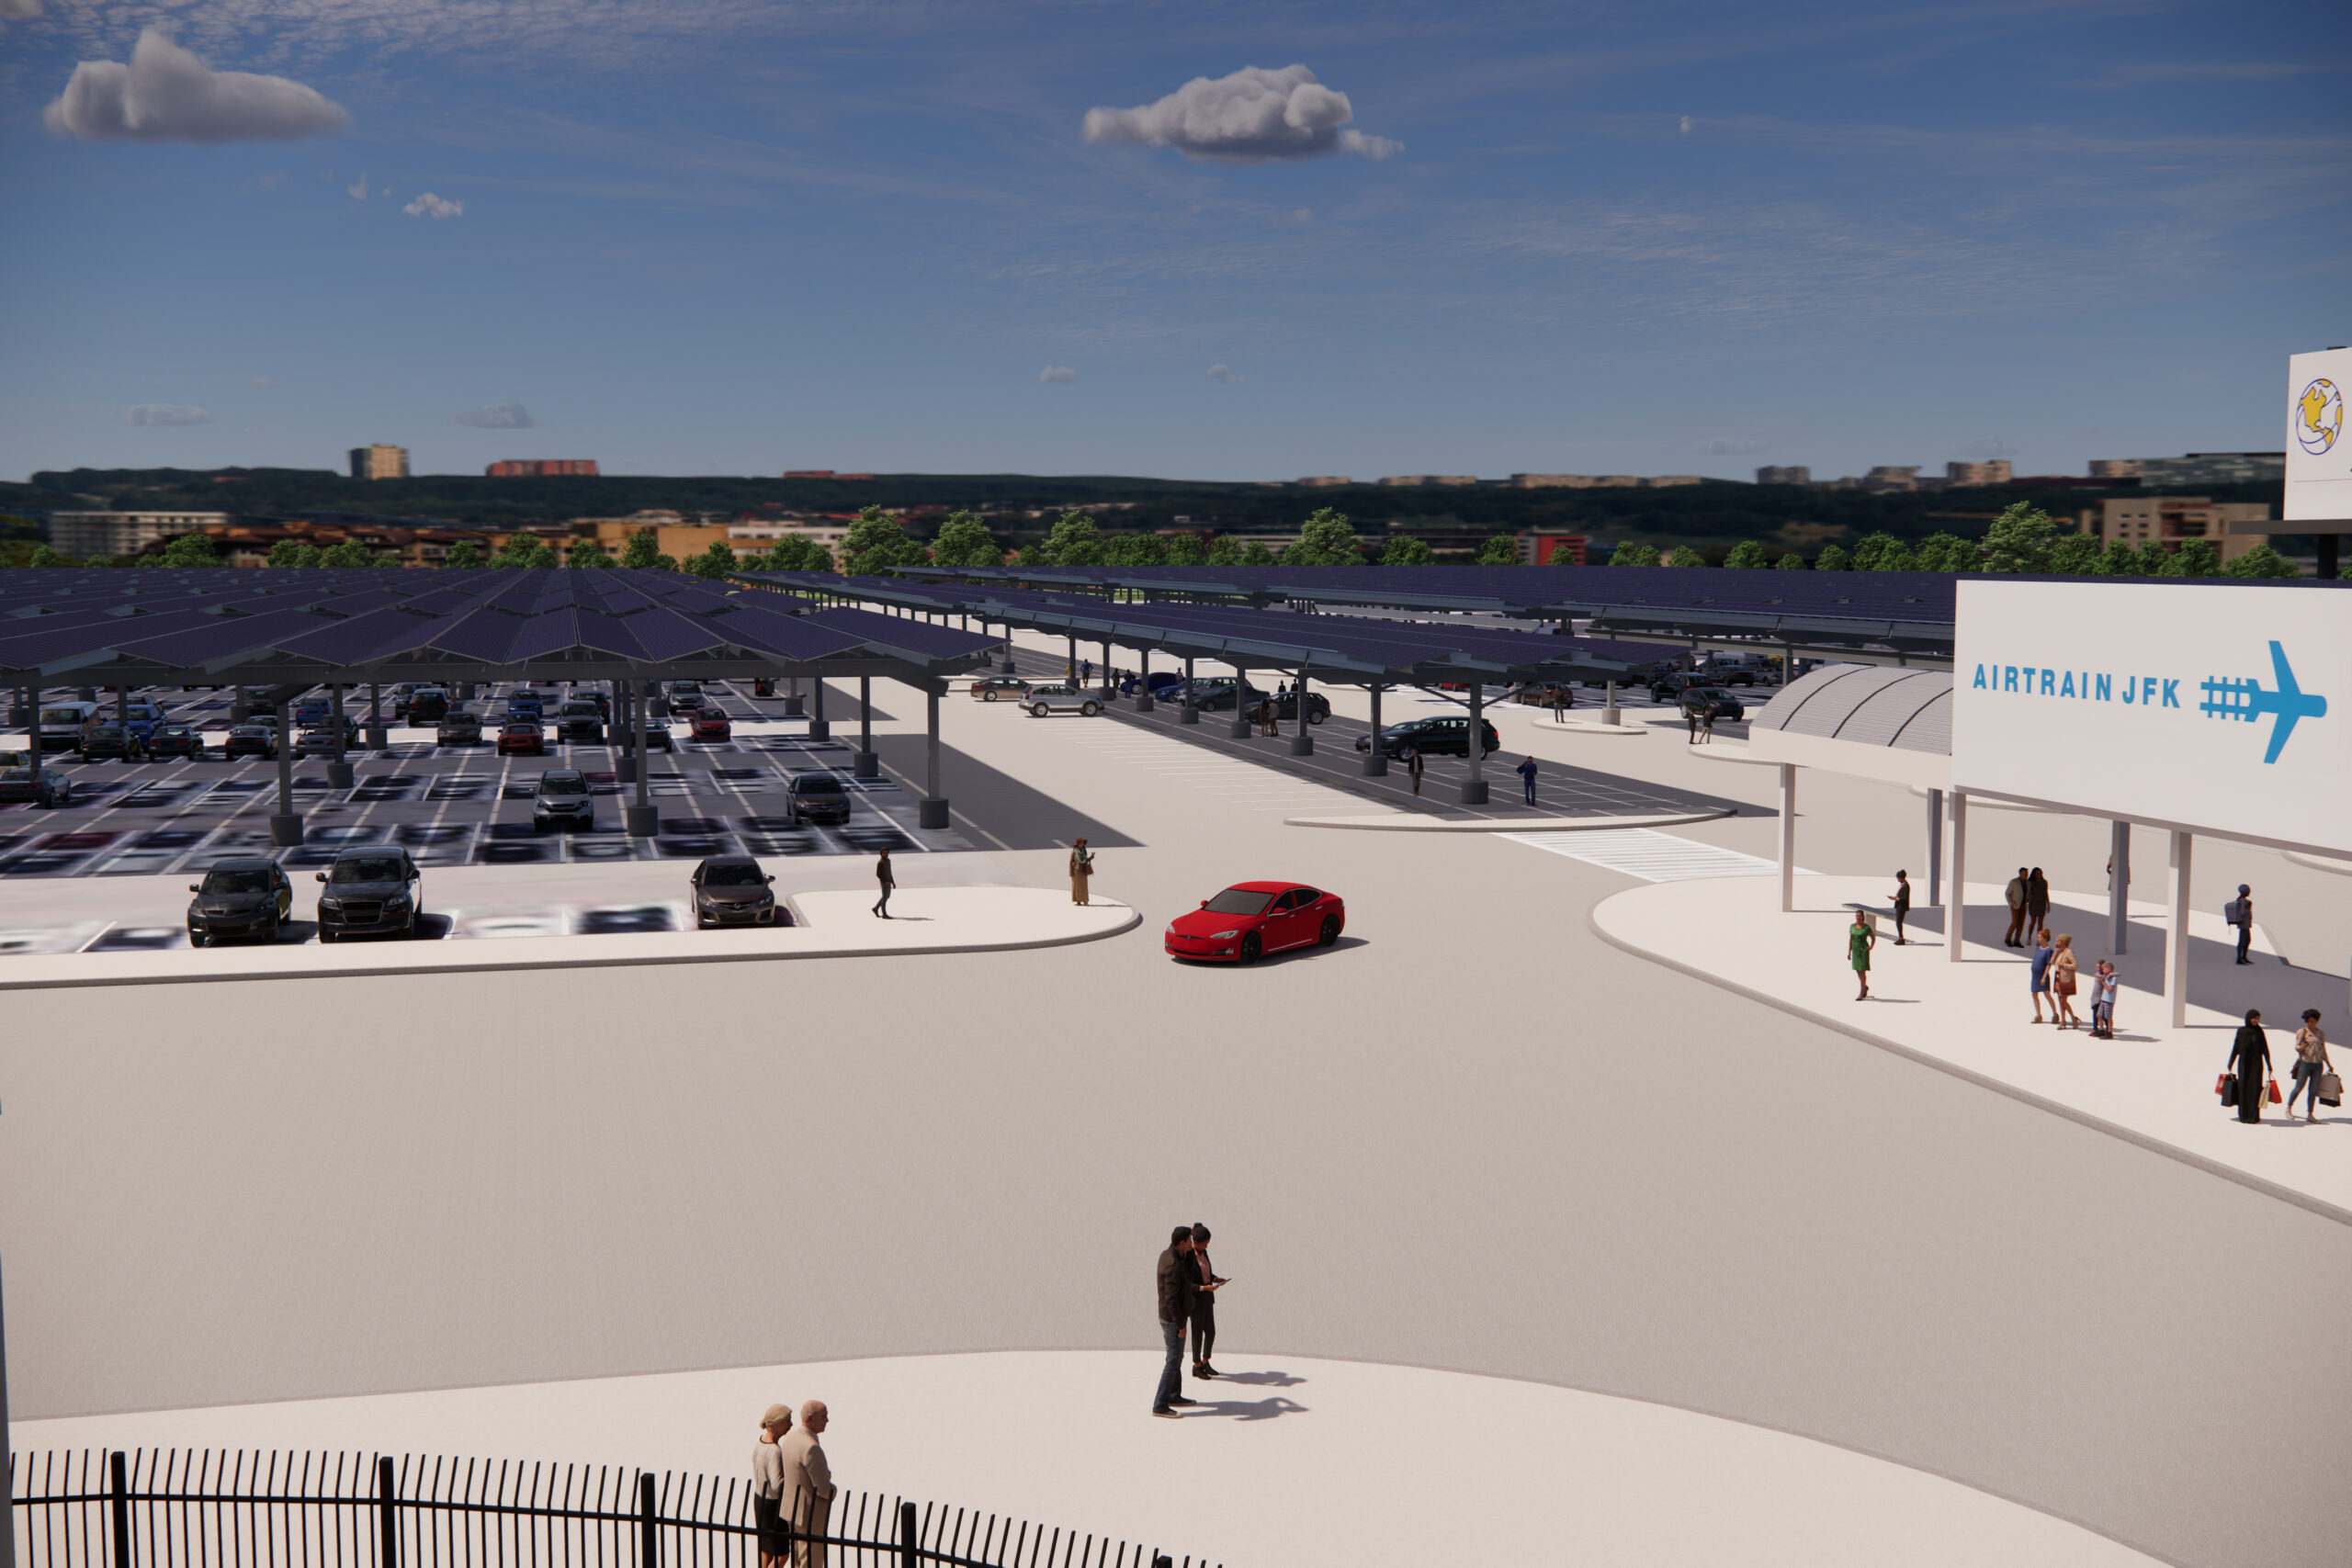 New York Gov. Hochul cited the JFK solar carport project in her 2024 State of the State message as an example of New York’s transformative infrastructure projects